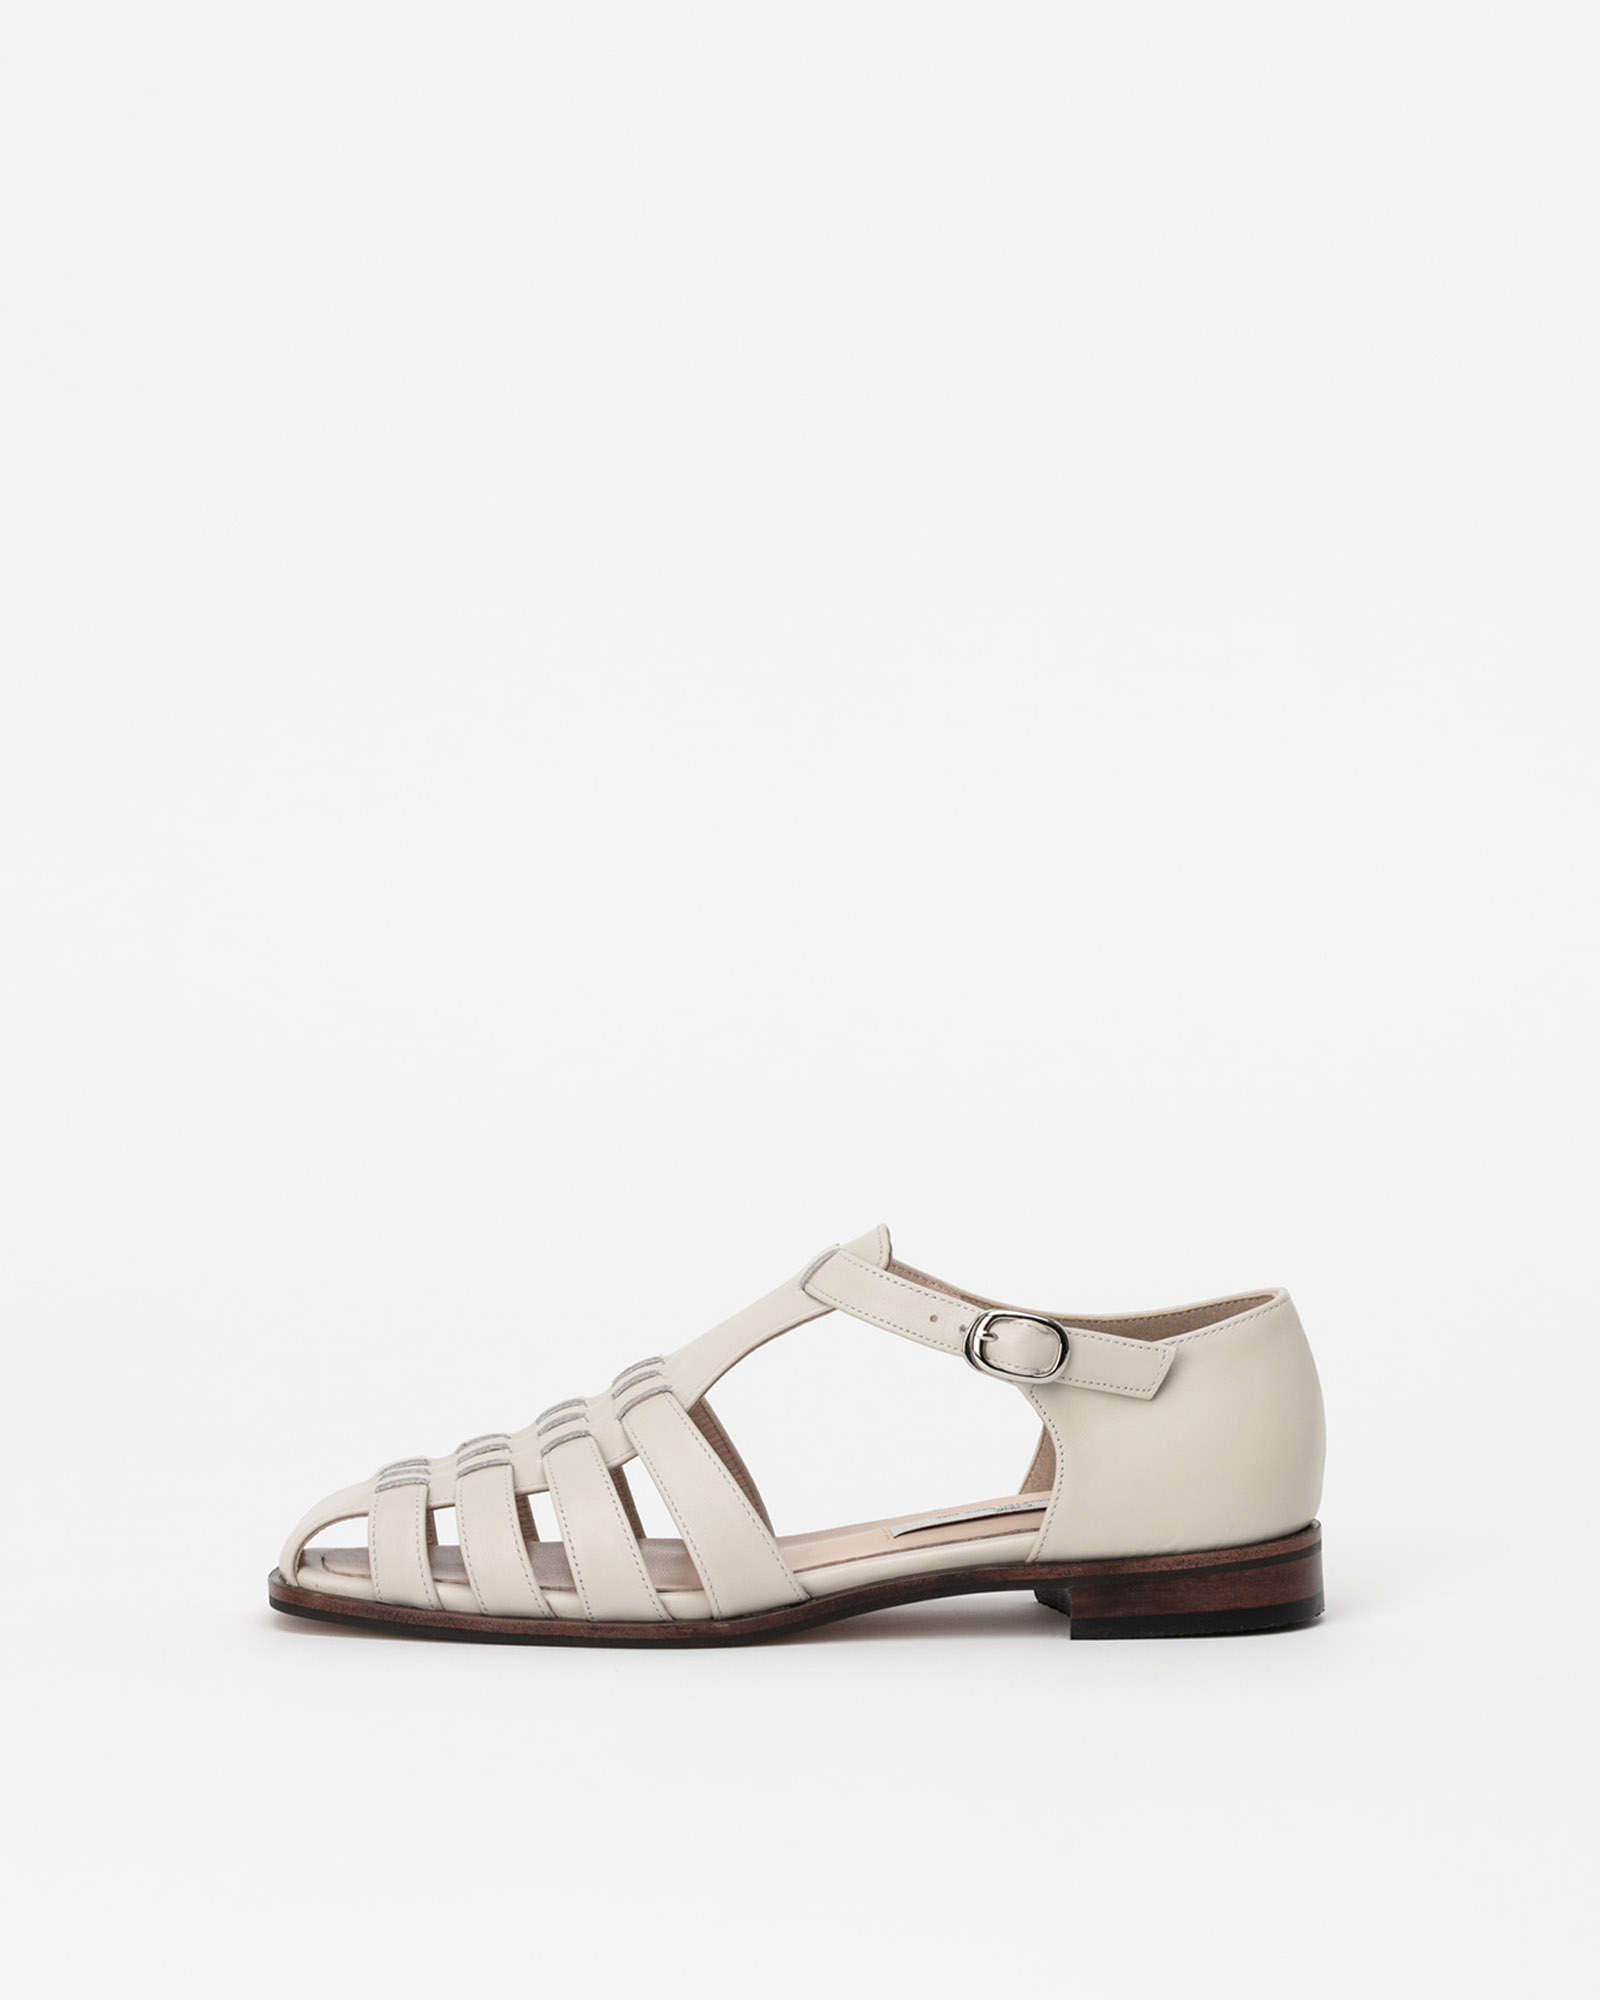 Solarin Gladiator Loafer Sandals in Ivory